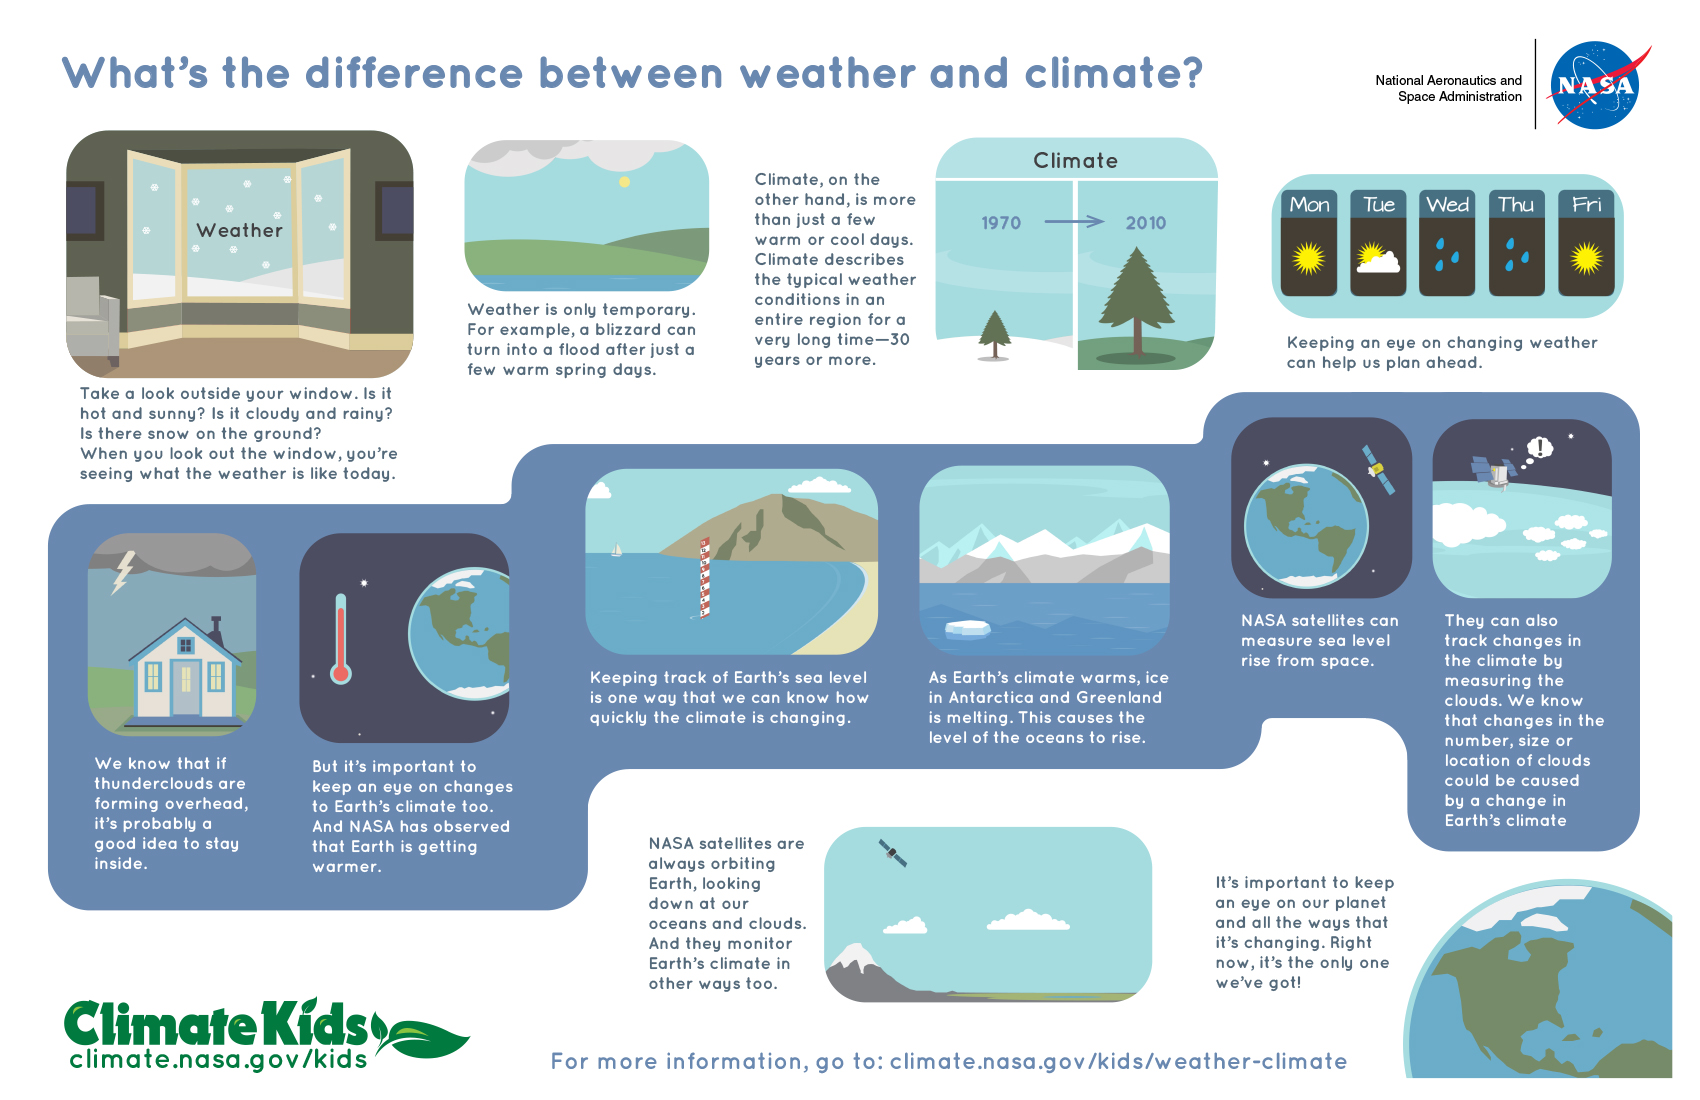 What's the Difference Between Weather and Climate? | NASA Climate Kids